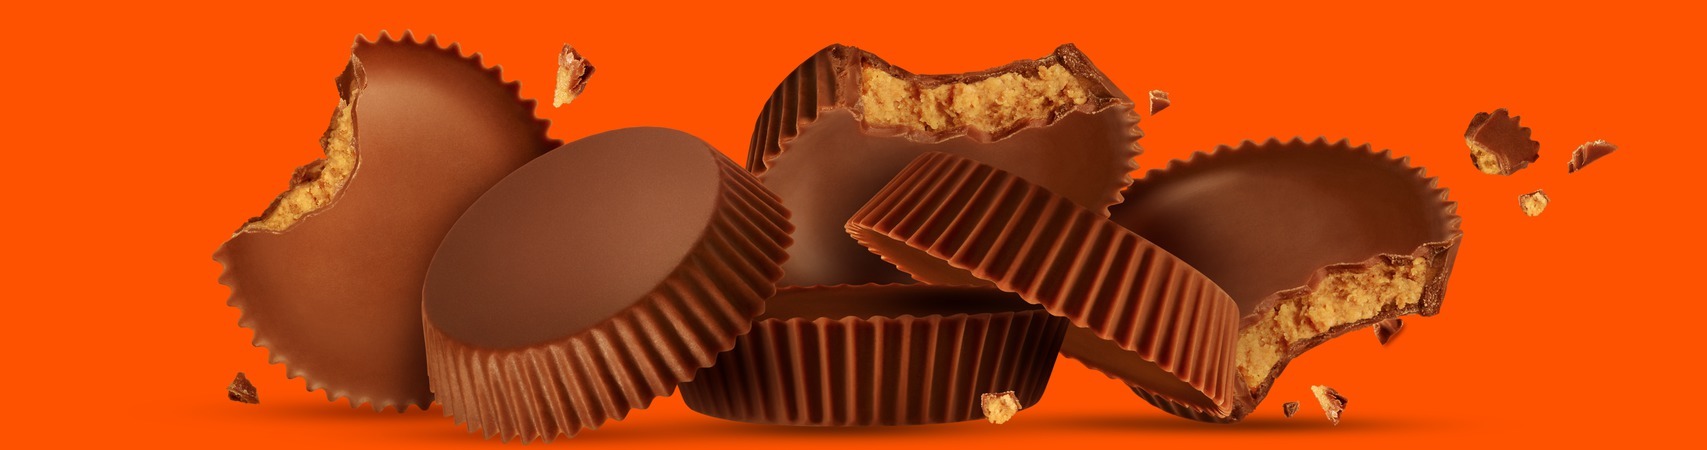 American Candy, Chocolate, Reese's